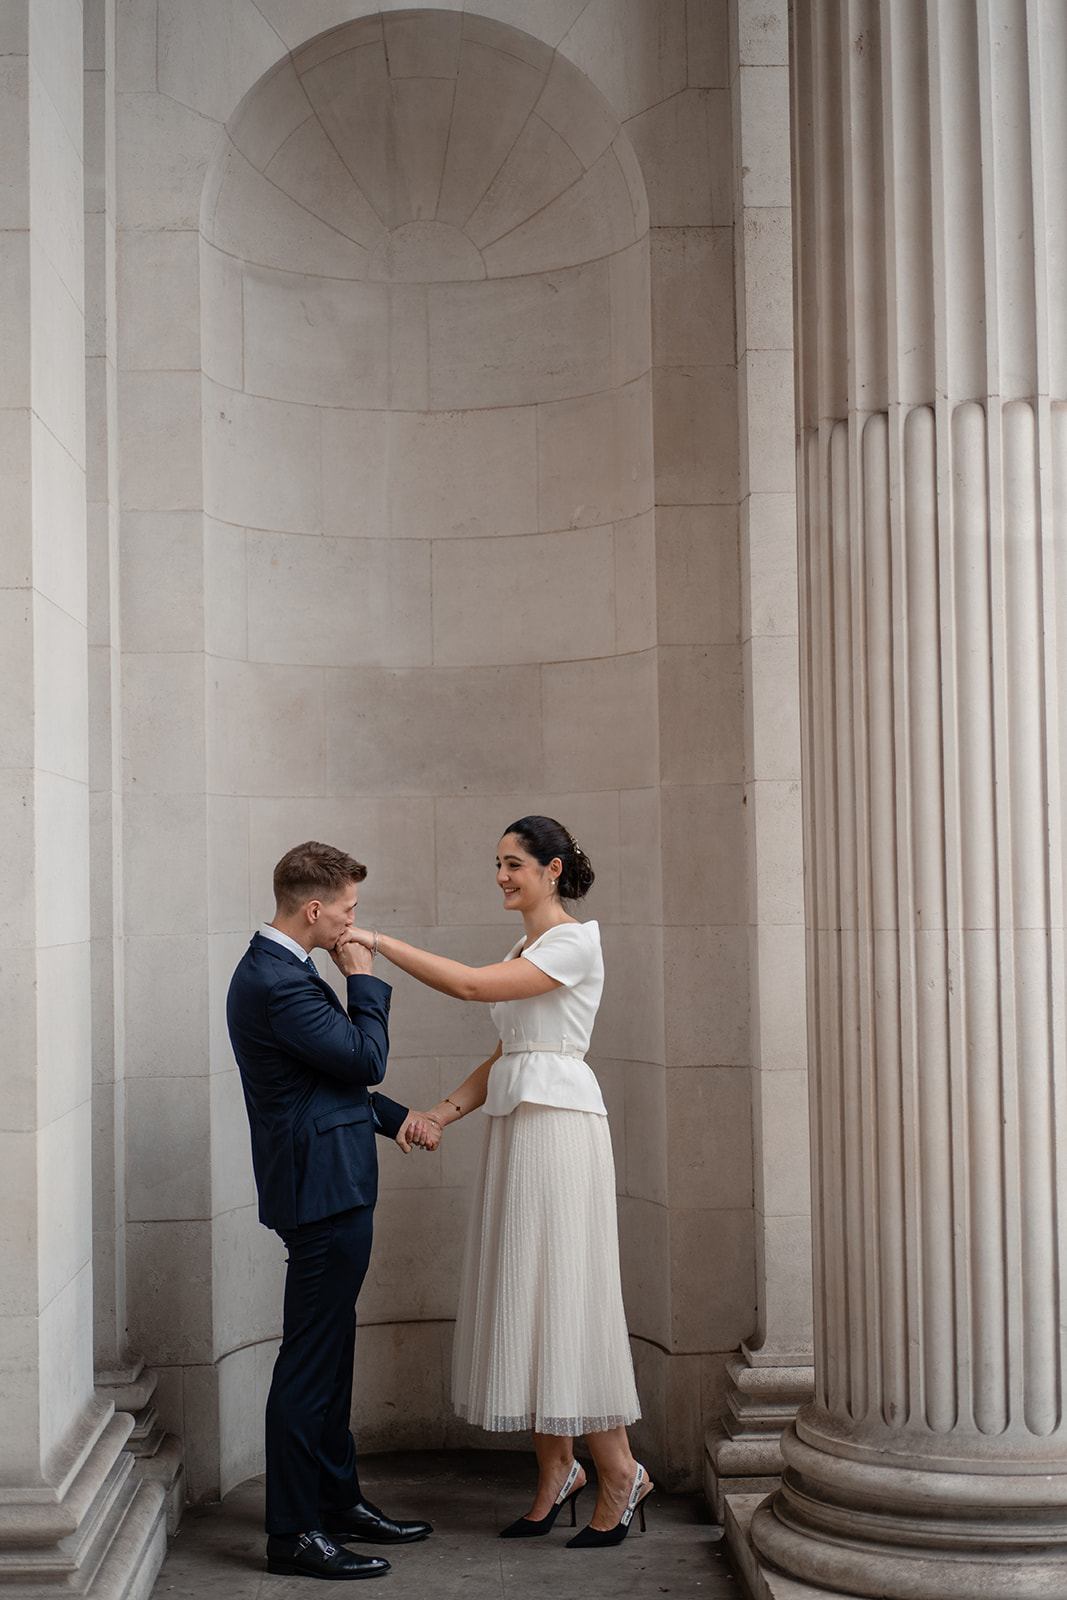 London wedding photography at Marylebone old town hall